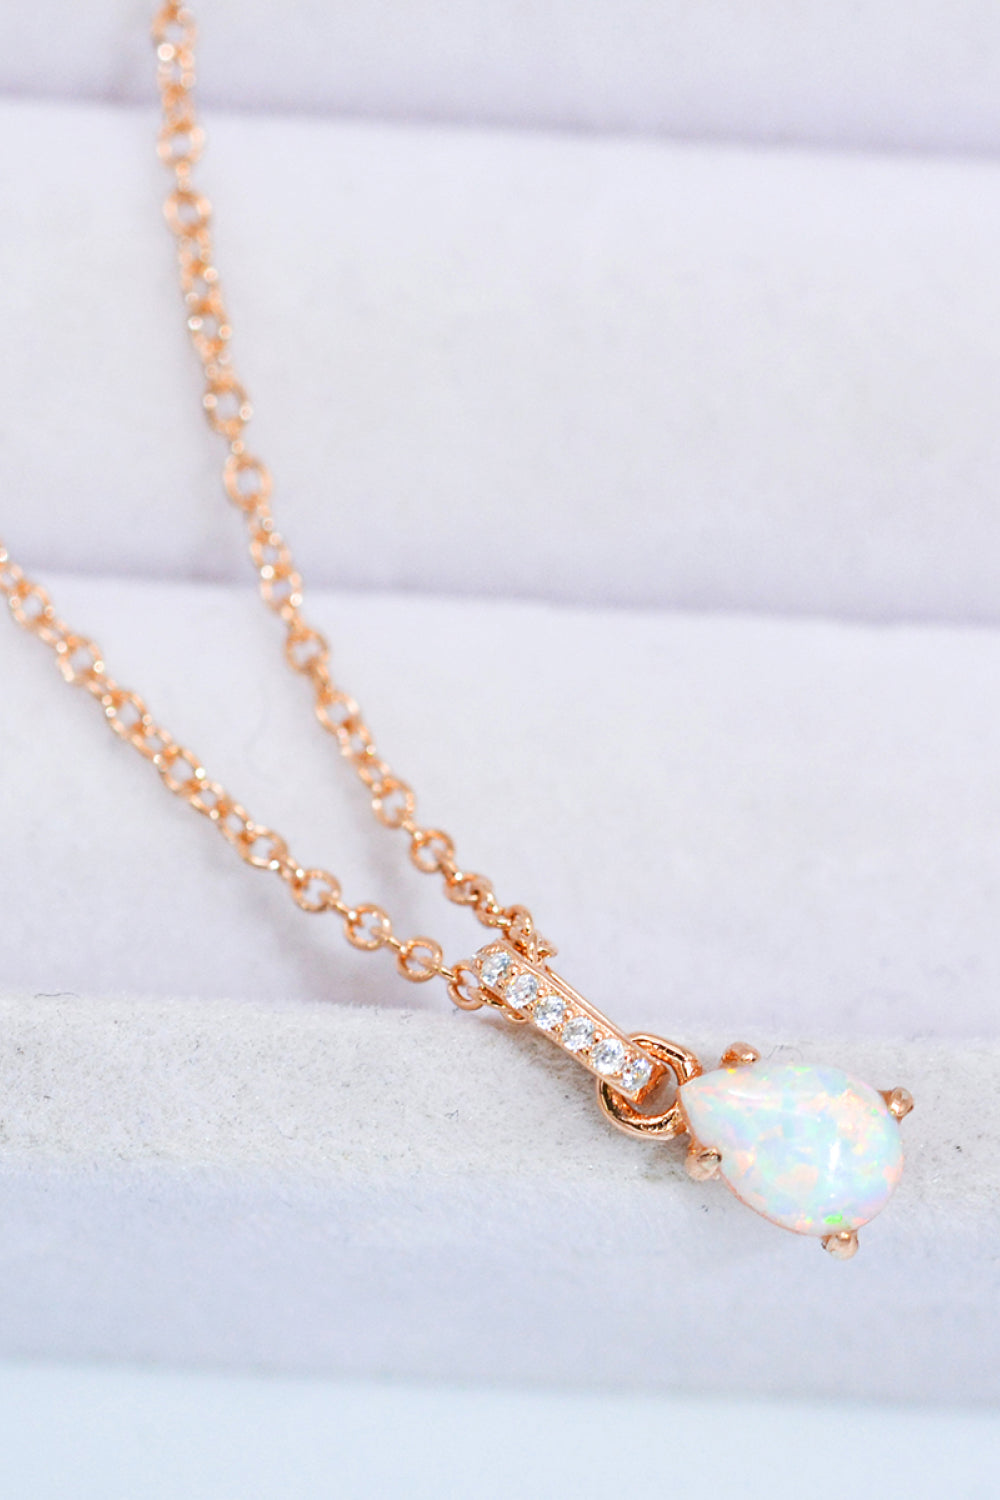 Opal Pendant 925 Sterling Silver Chain-Link Necklace - Tophatter Deals